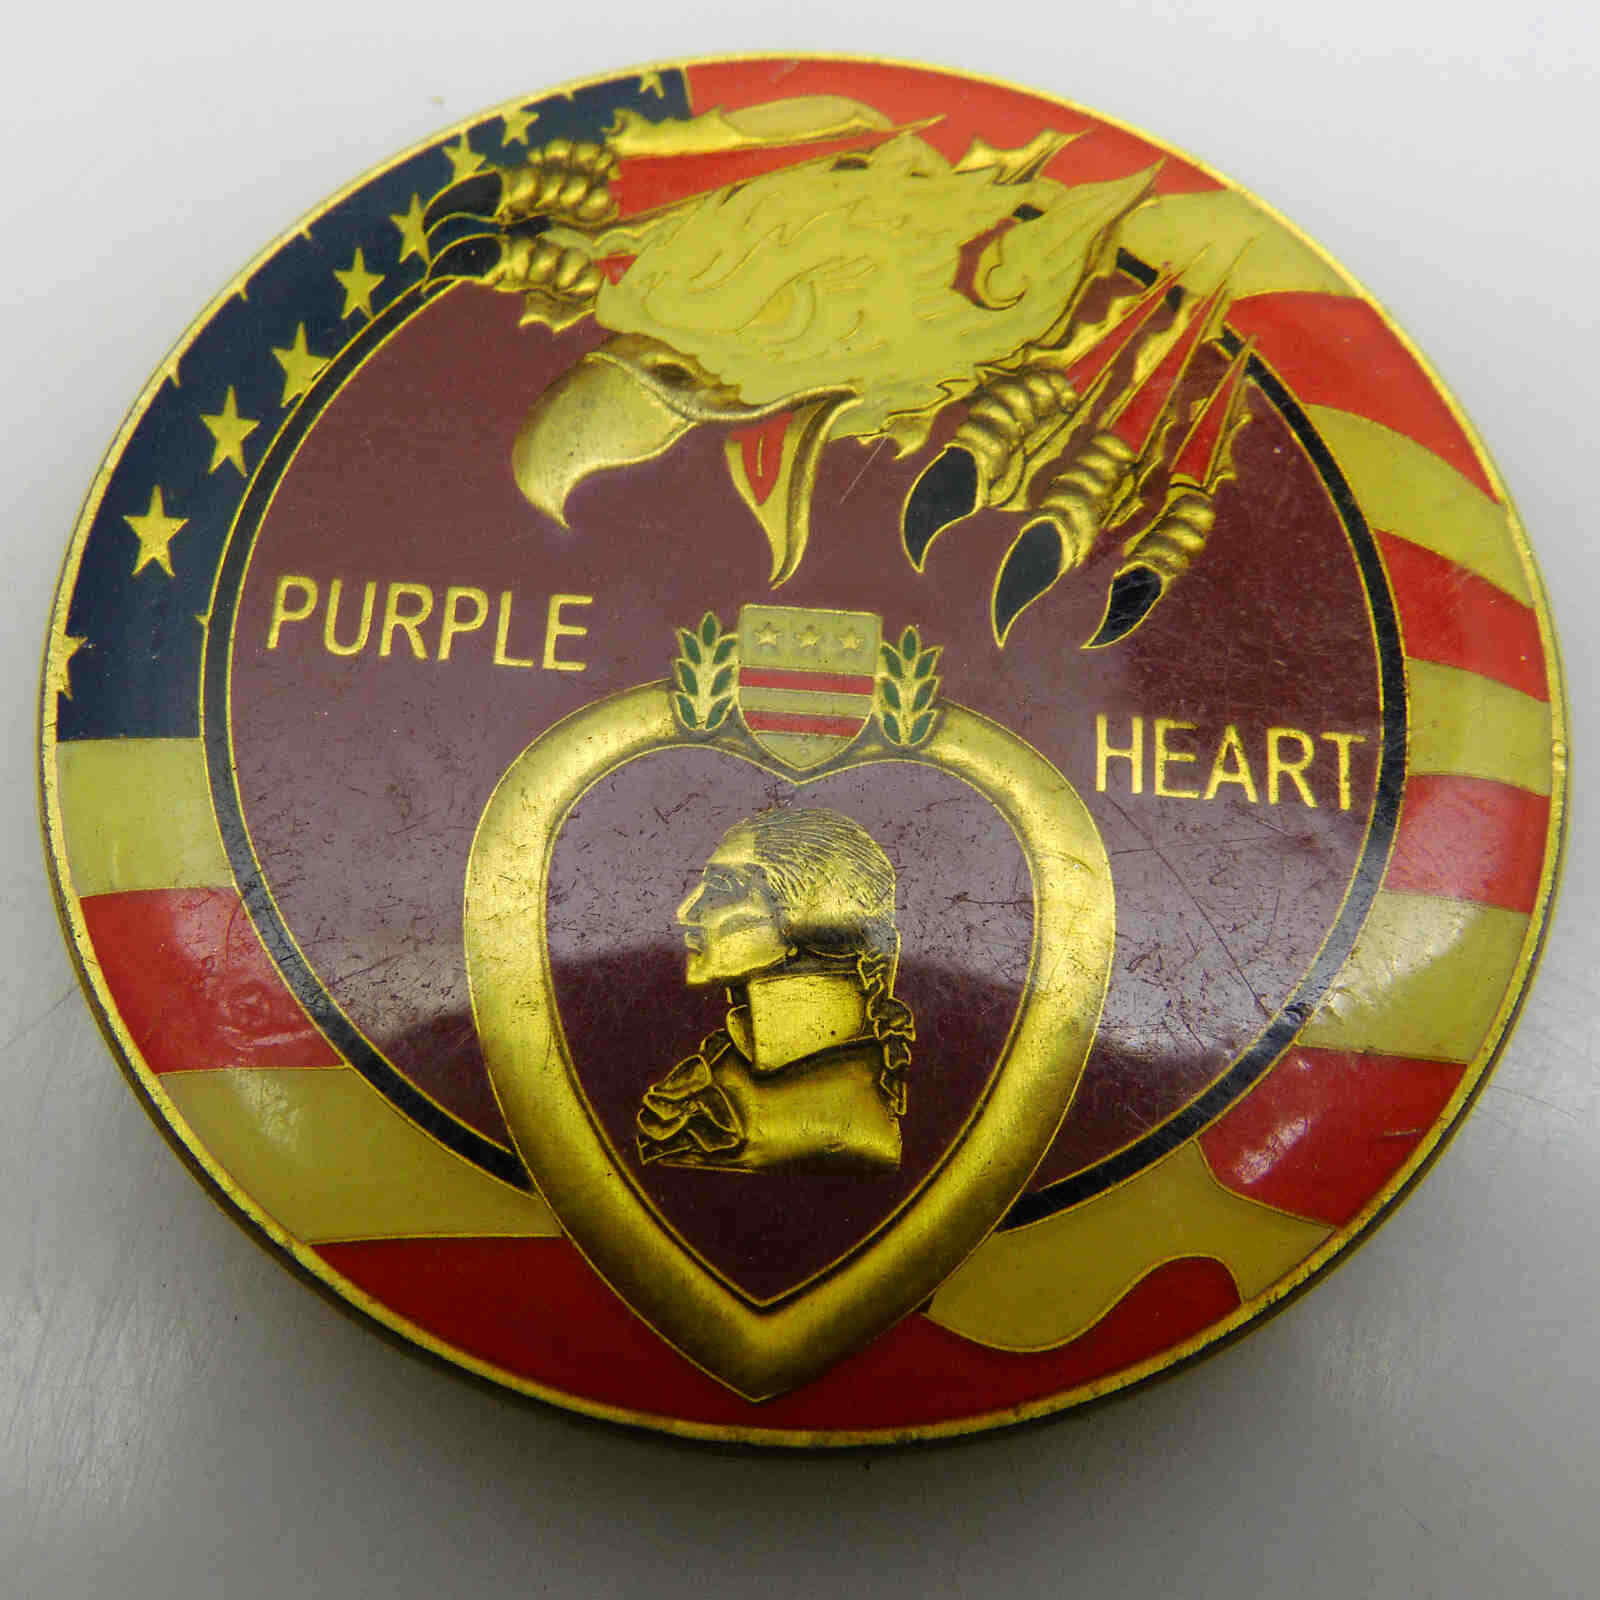 PURPLE HEART TRUE HEROES FOR MILITARY MERIT CHALLENGE COIN